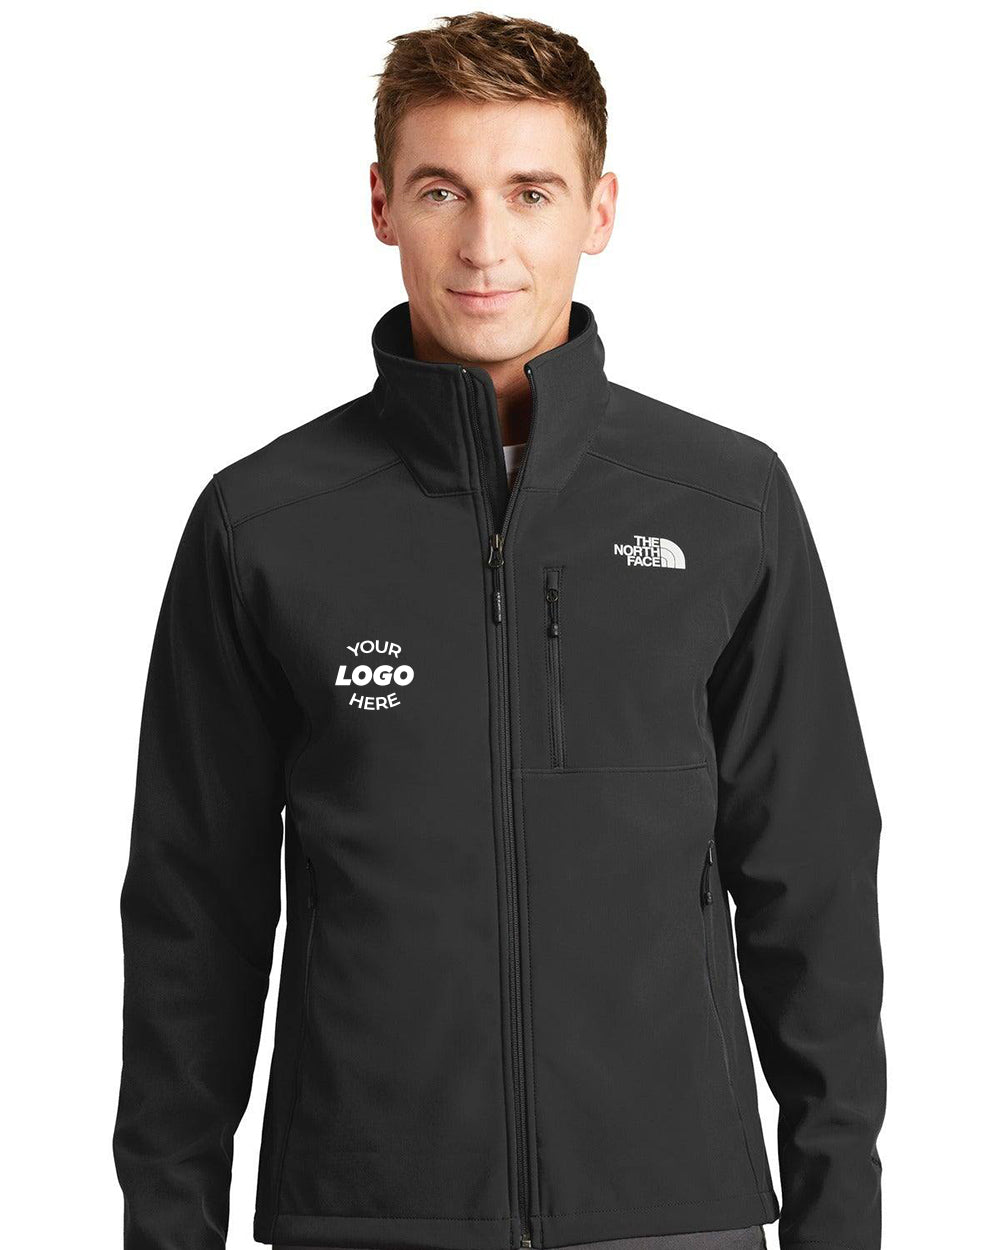 The North Face Ladies Fleece Jacket with Embroidery, NF0A3LH8